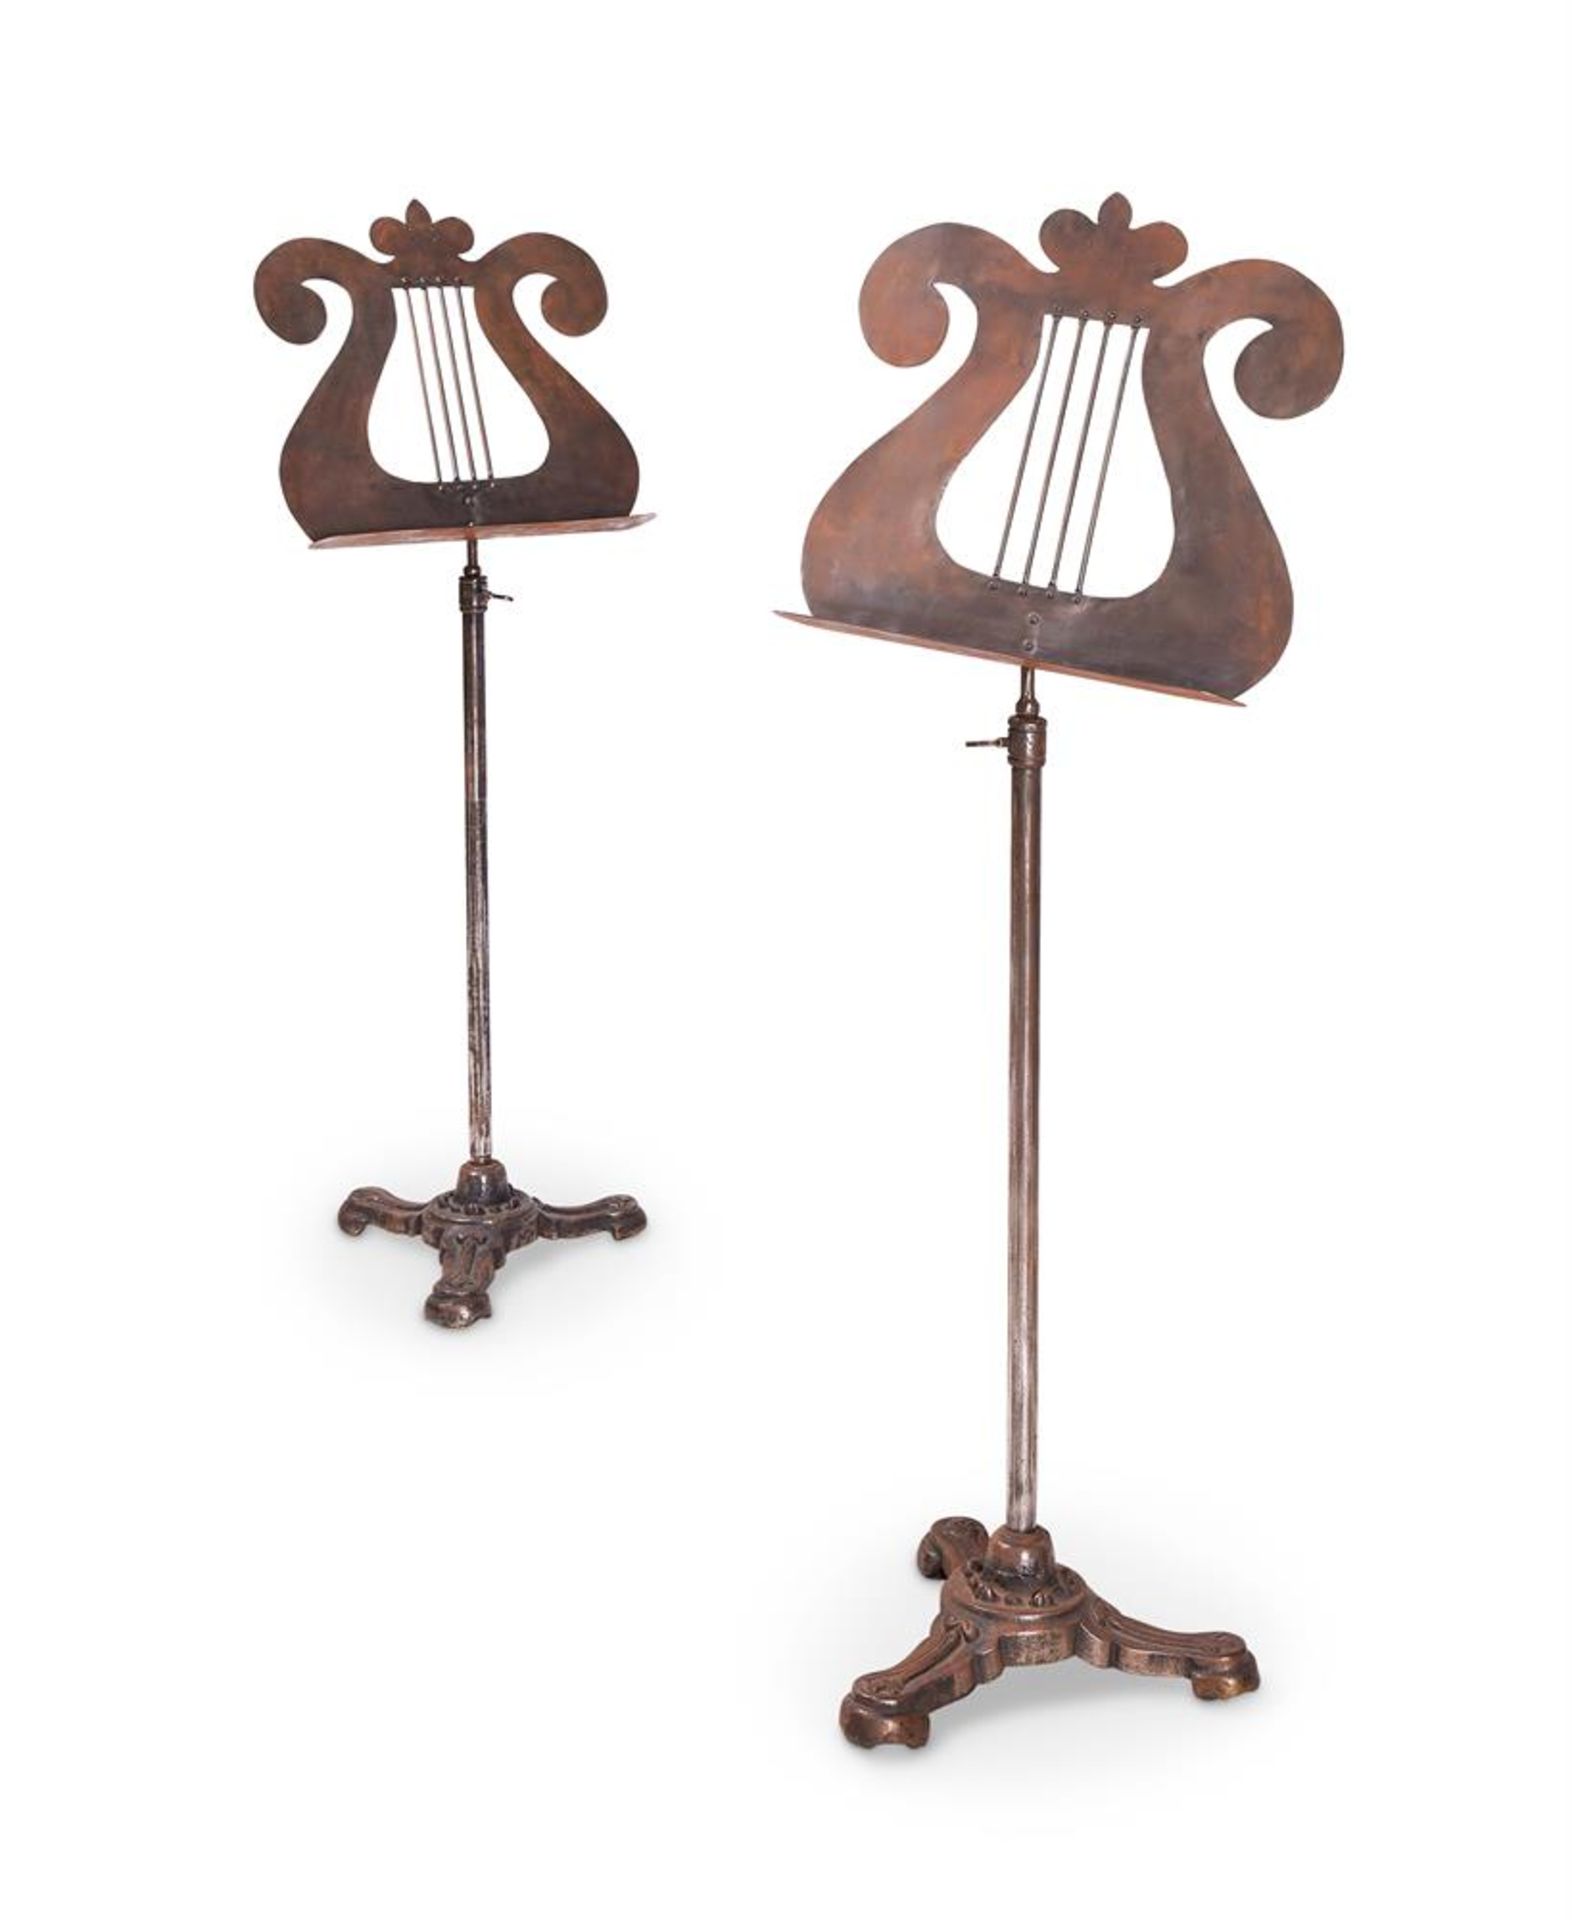 A PAIR OF STEEL AND CAST IRON MUSIC STANDS,SECOND HALF 19TH CENTURY AND LATER